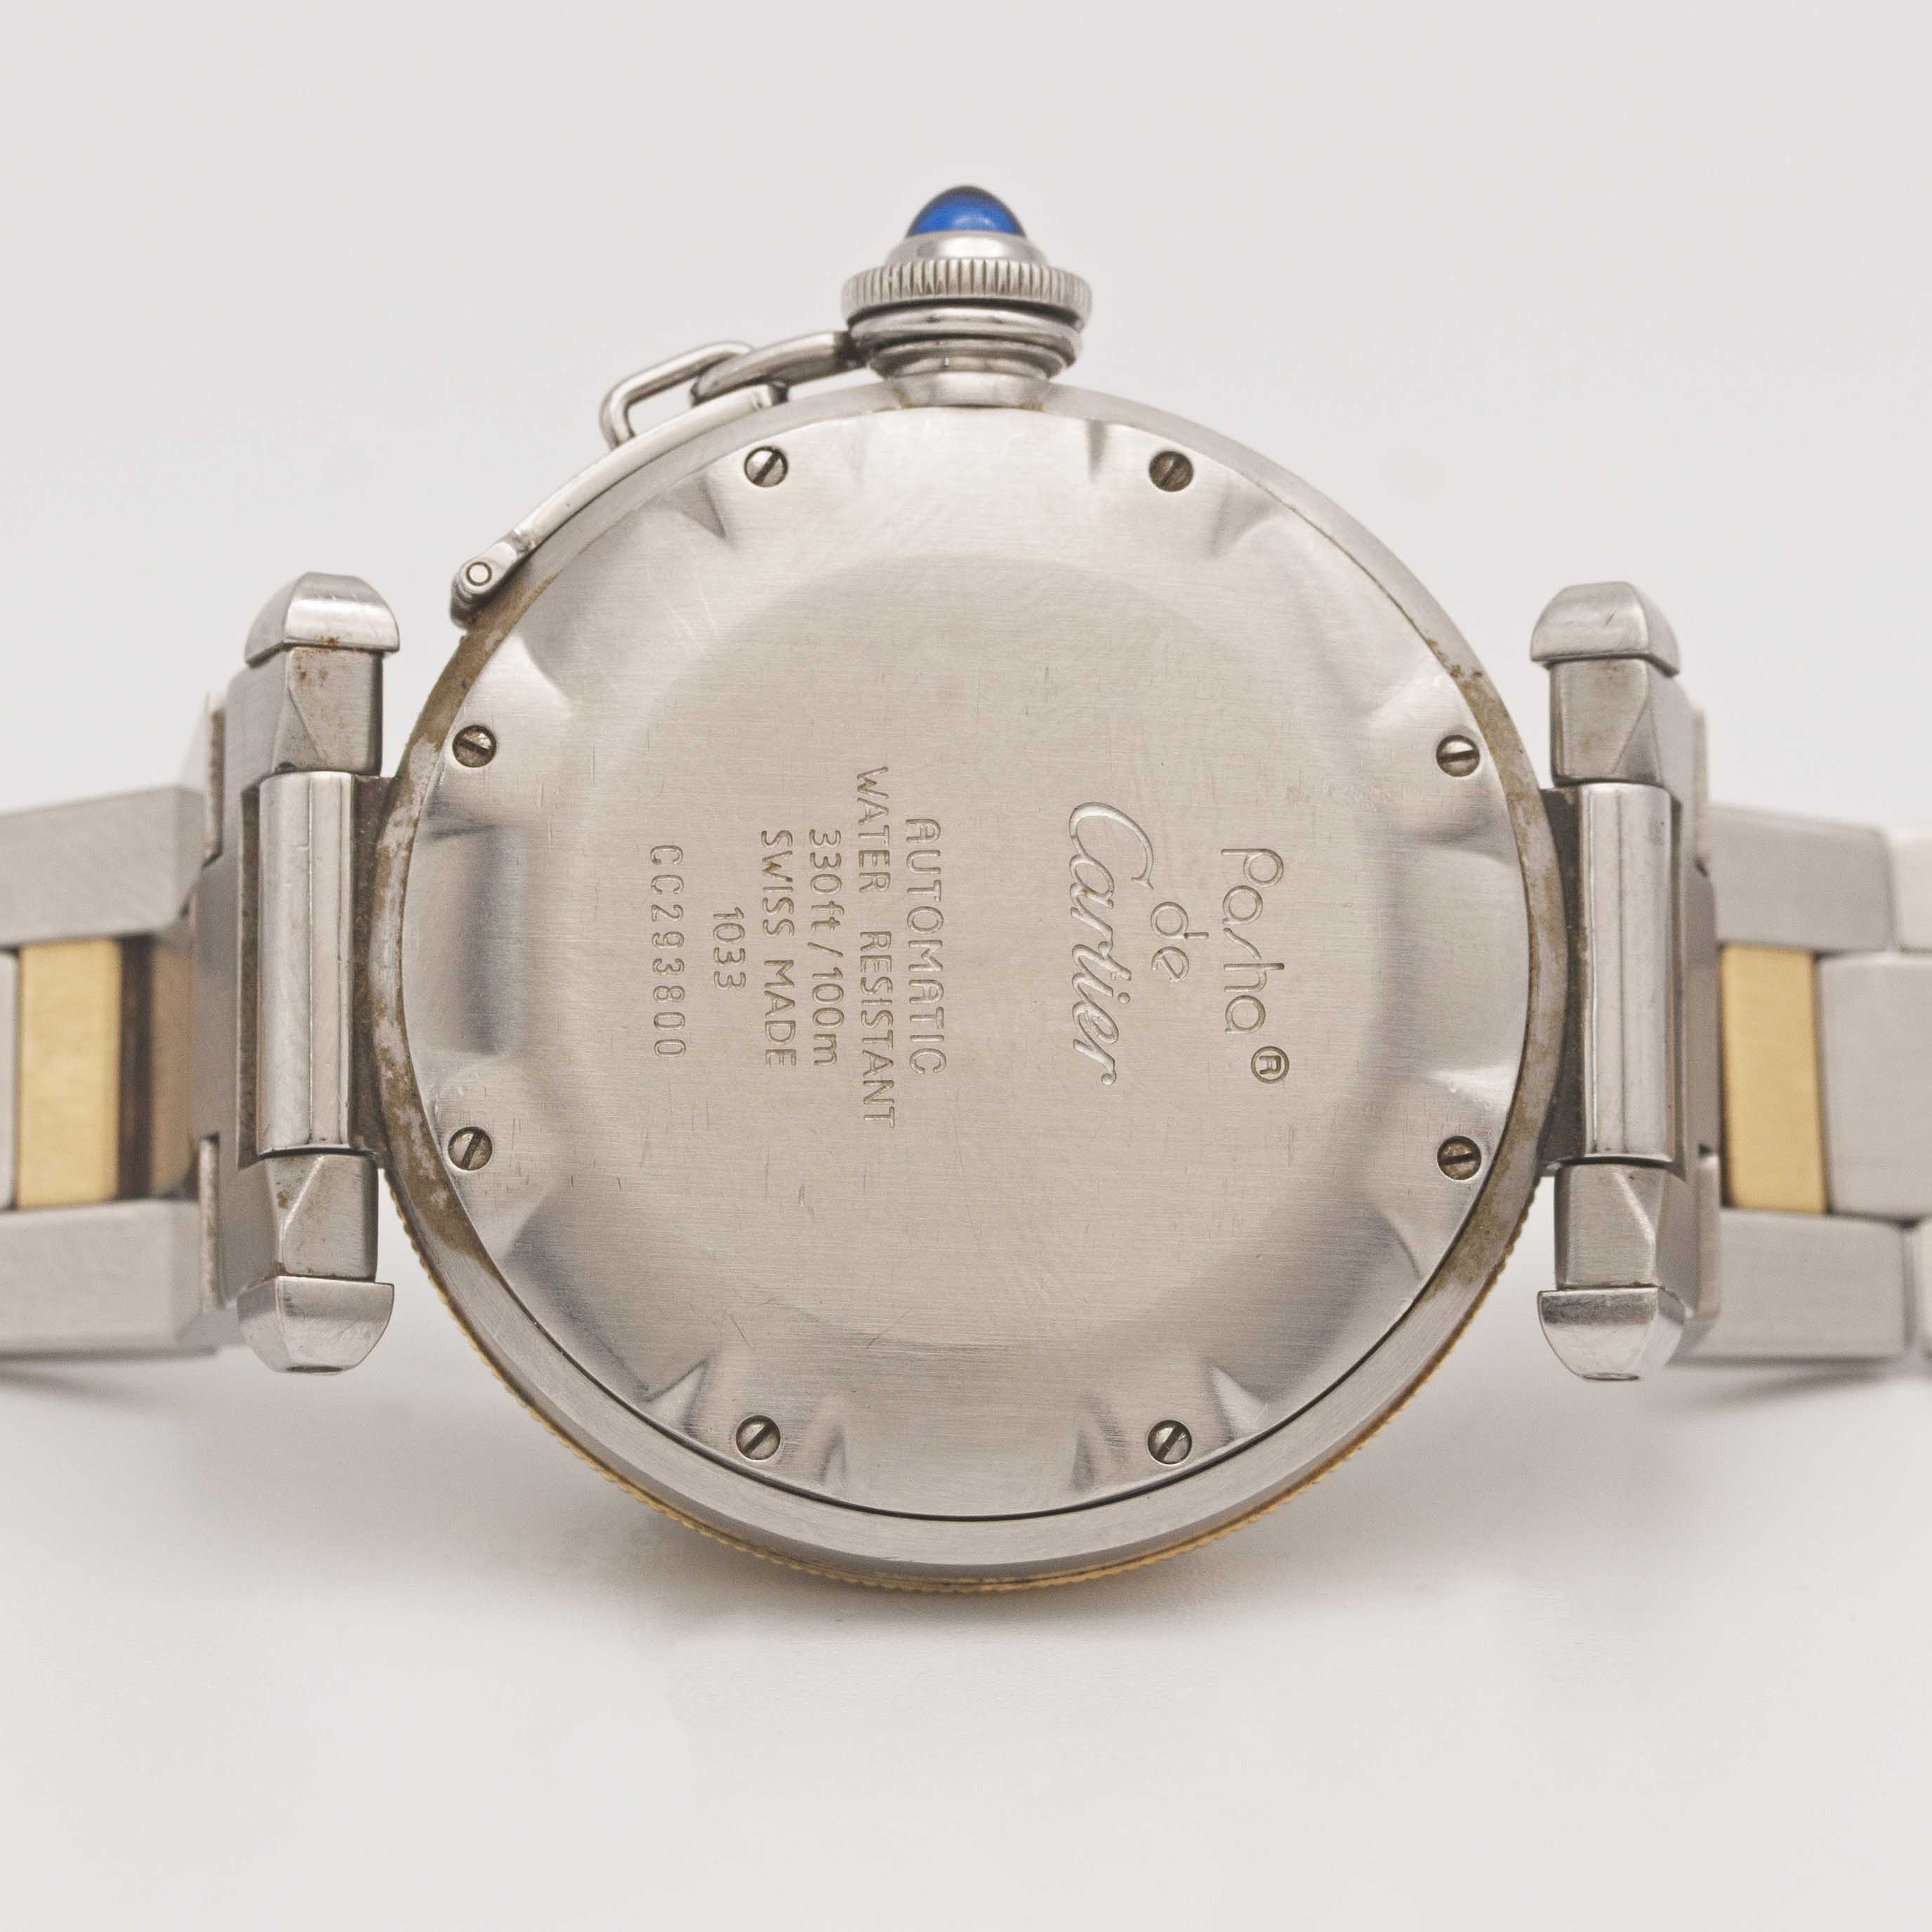 A GENTLEMAN'S SIZE STEEL & GOLD CARTIER PASHA AUTOMATIC POWER RESERVE BRACELET WATCH CIRCA 2000, - Image 7 of 9